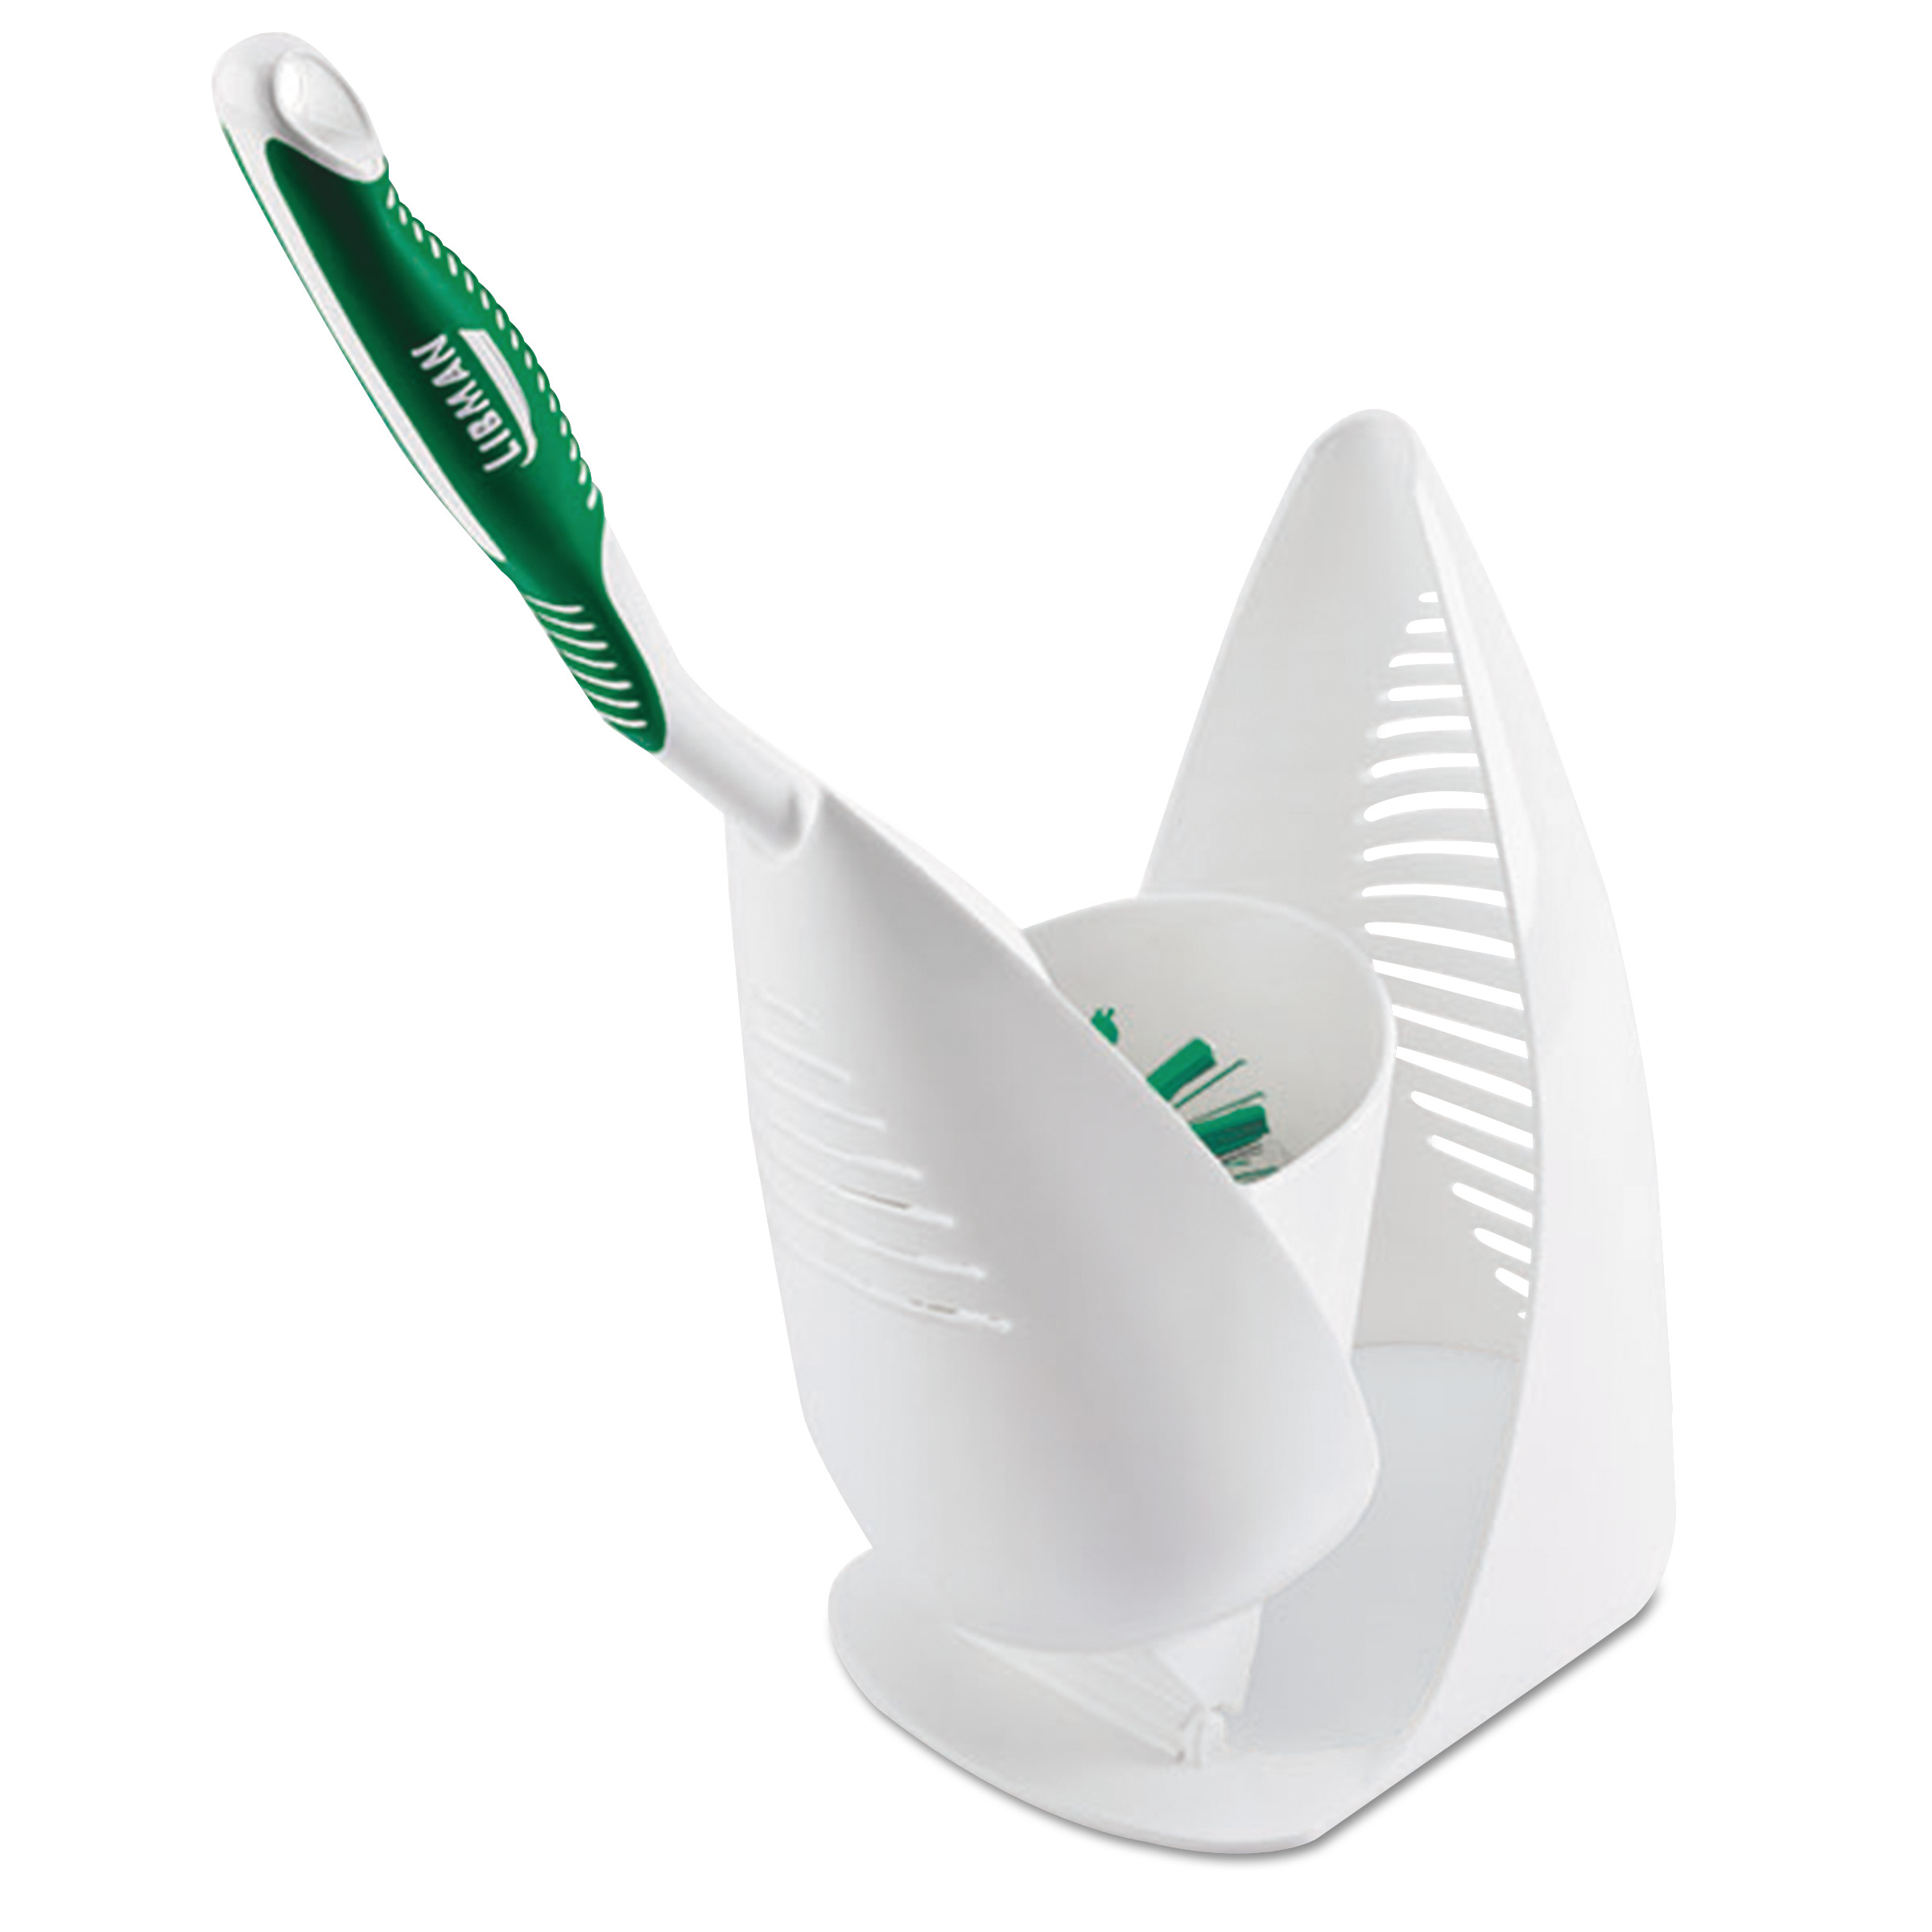  Libman Commercial LBN 1022 Premium Angled Toilet Bowl Brush and Caddy, Green/White, 4/Carton (LBN1022CT) 